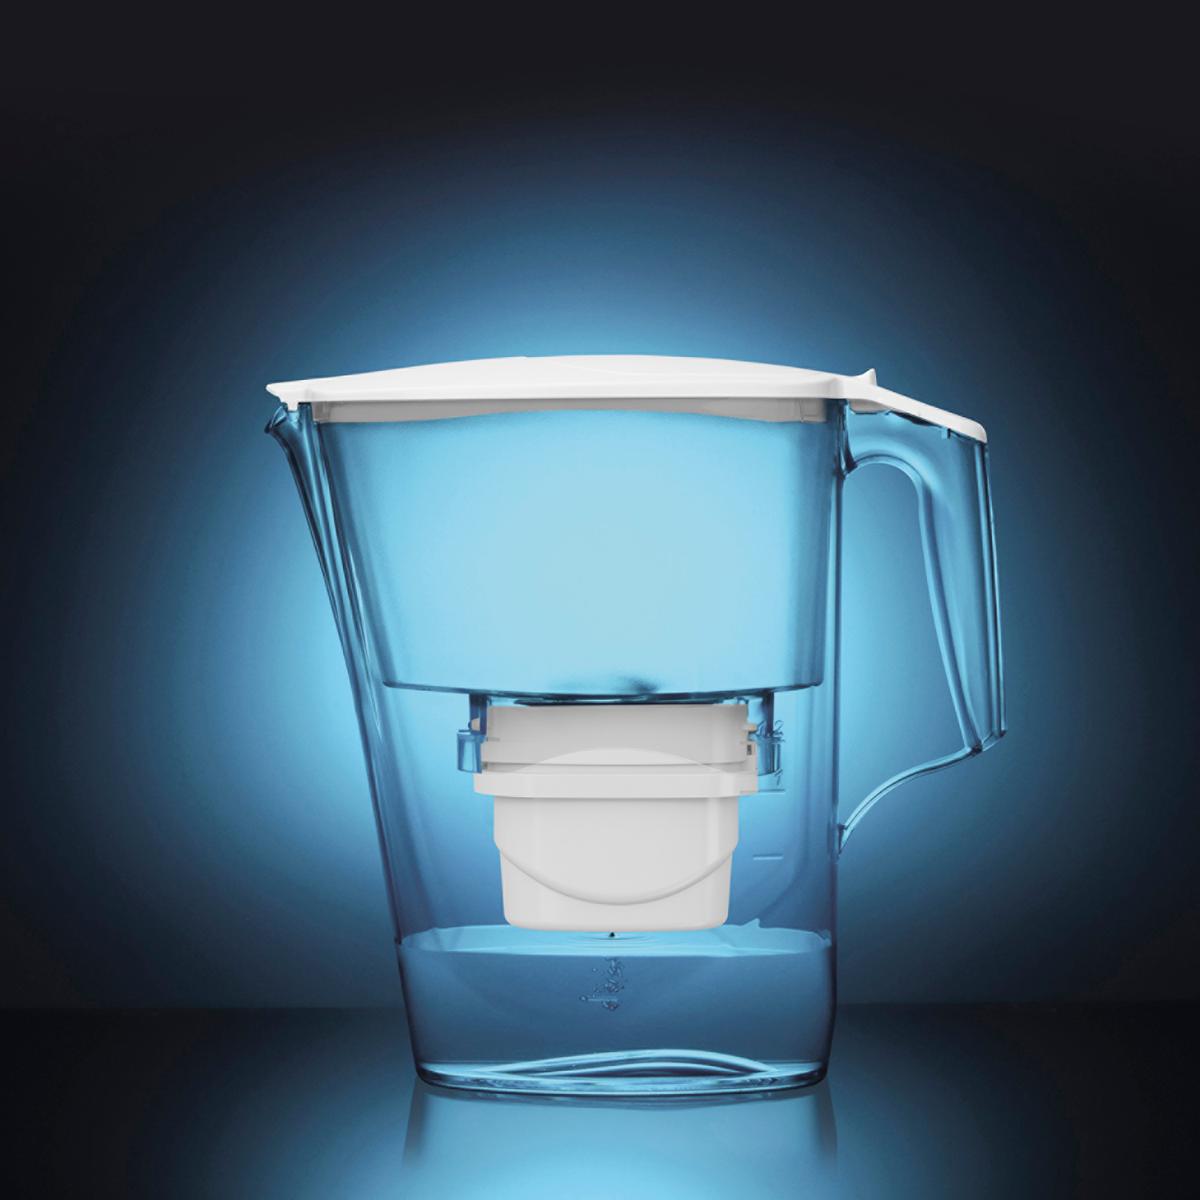 WATER JUG WITH FILTER, Aqua Optima - Evolve, Brands, Common, Products